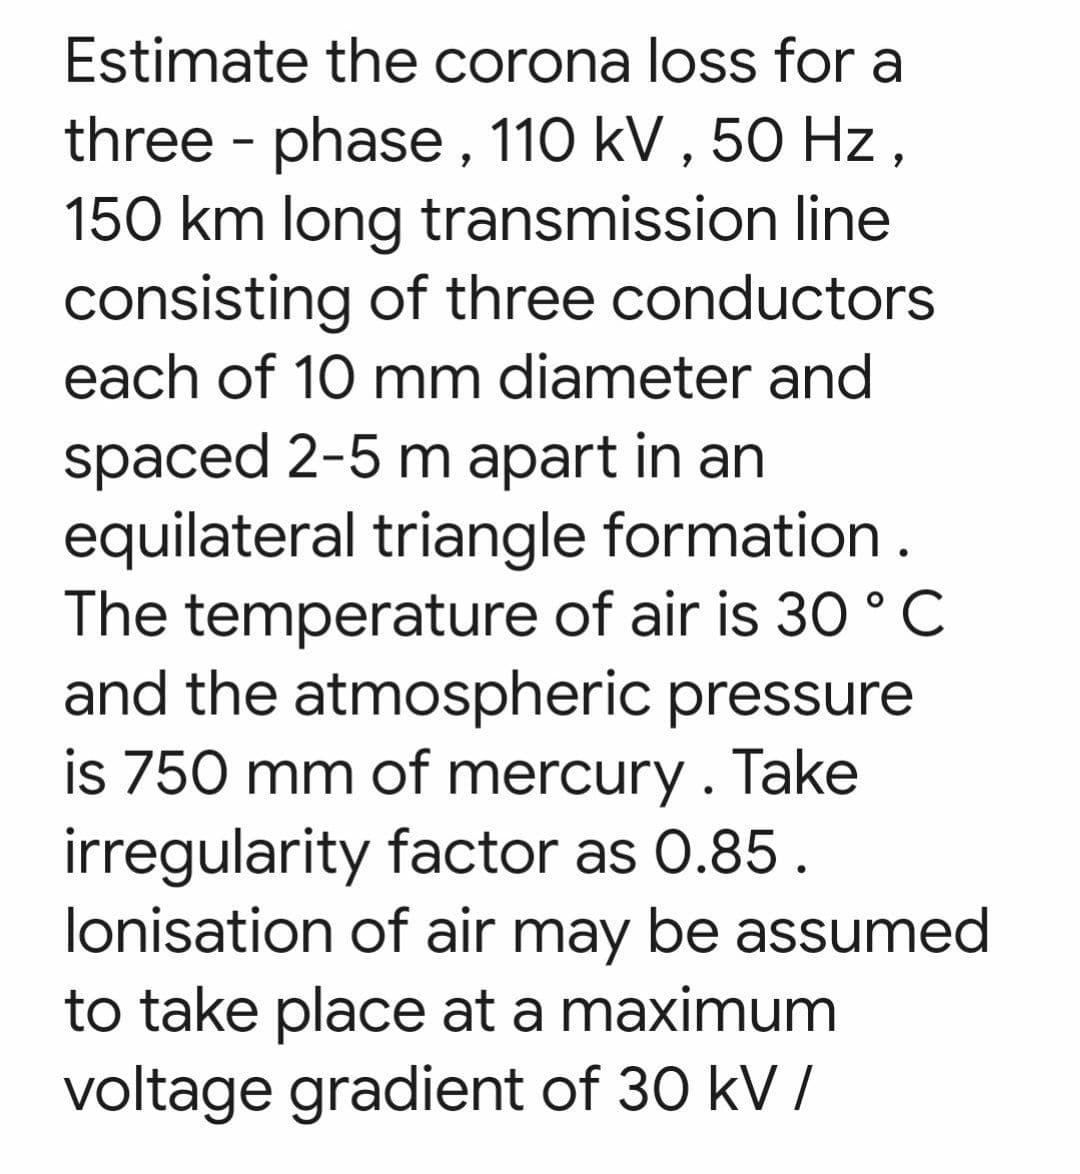 Estimate the corona loss for a
three-phase, 110 kV, 50 Hz,
150 km long transmission line
consisting of three conductors
each of 10 mm diameter and
spaced 2-5 m apart in an
equilateral triangle formation.
The temperature of air is 30 °C
and the atmospheric pressure
is 750 mm of mercury. Take
irregularity factor as 0.85.
lonisation of air may be assumed
to take place at a maximum
voltage gradient of 30 kV/